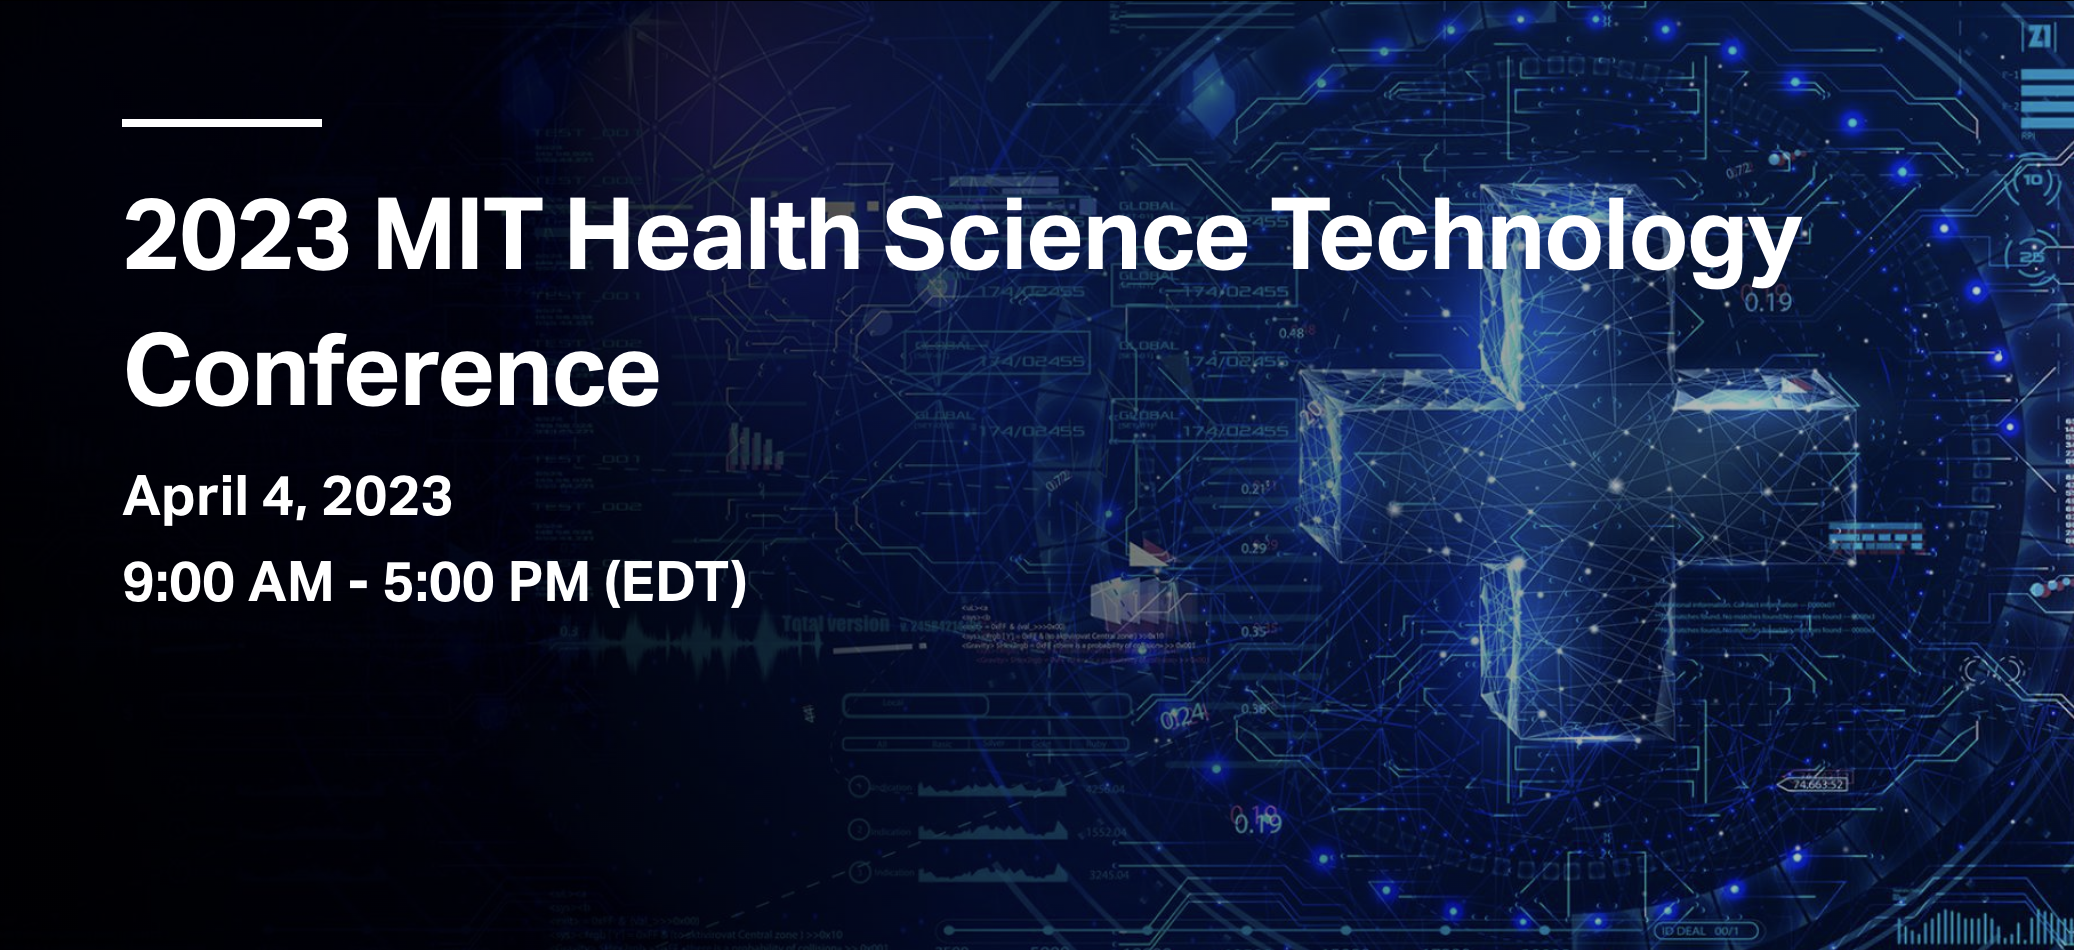 2023 MIT Health Science Technology Conference